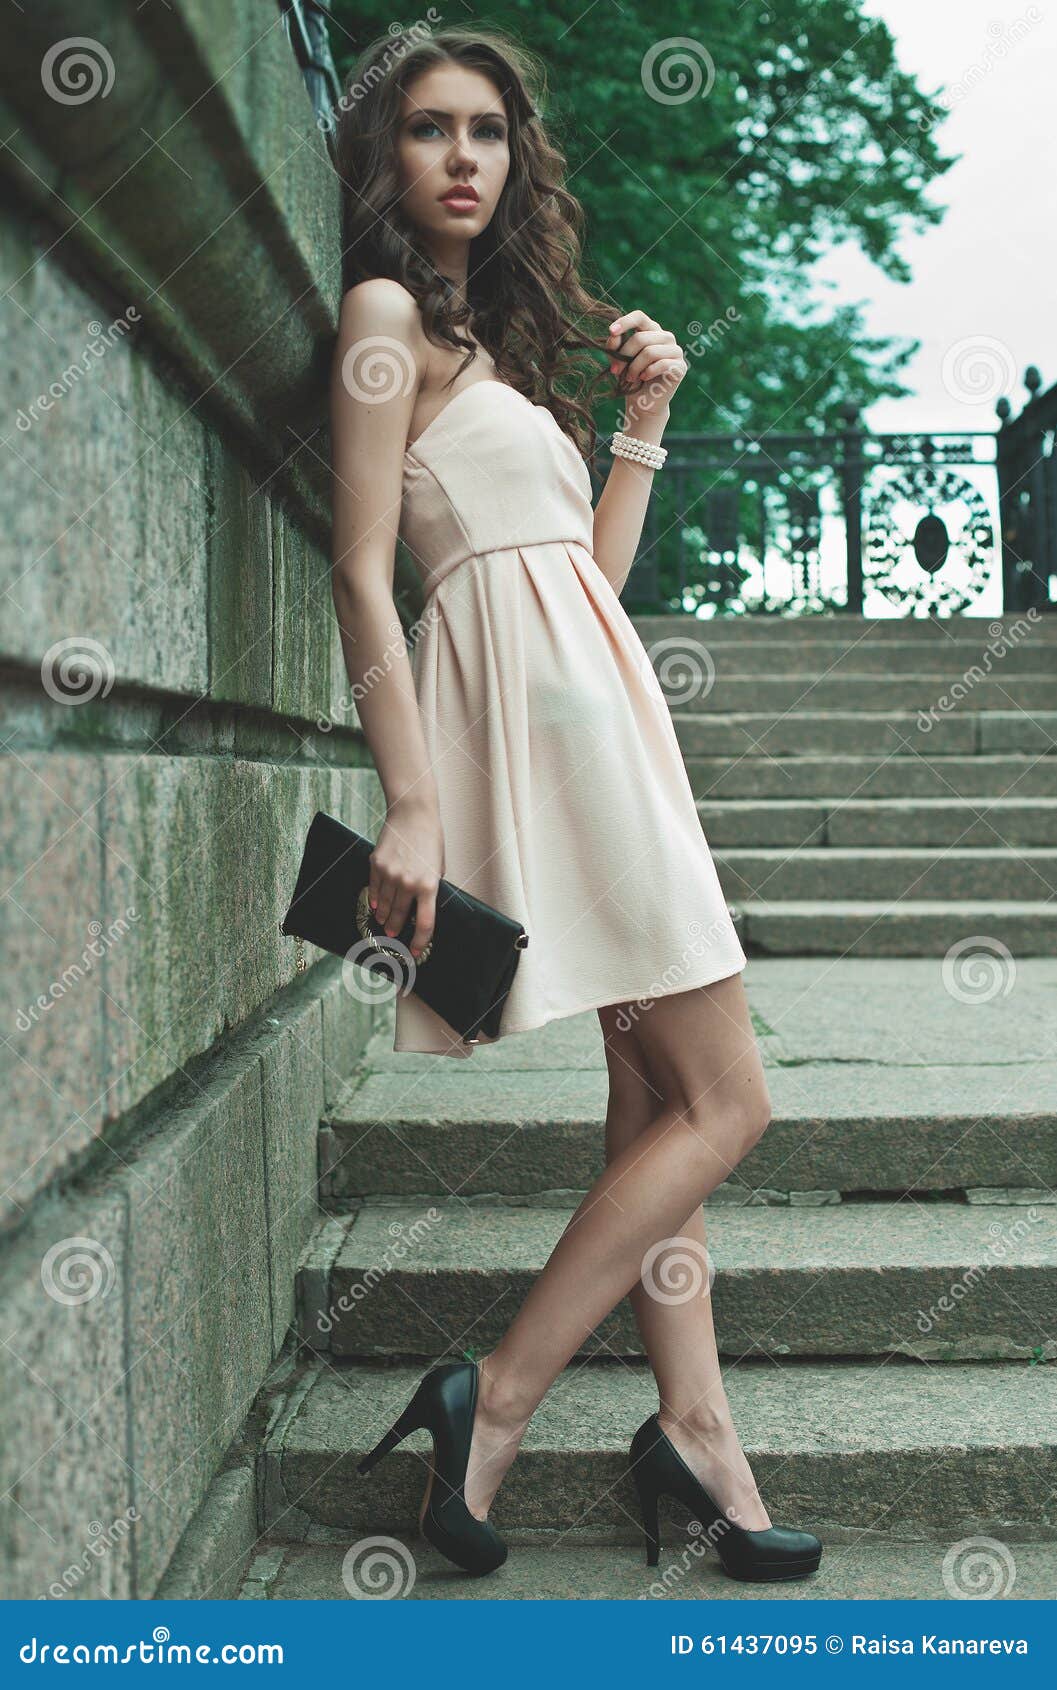 Young Woman Wearing Dress and Walking on the Street Stock Image - Image ...